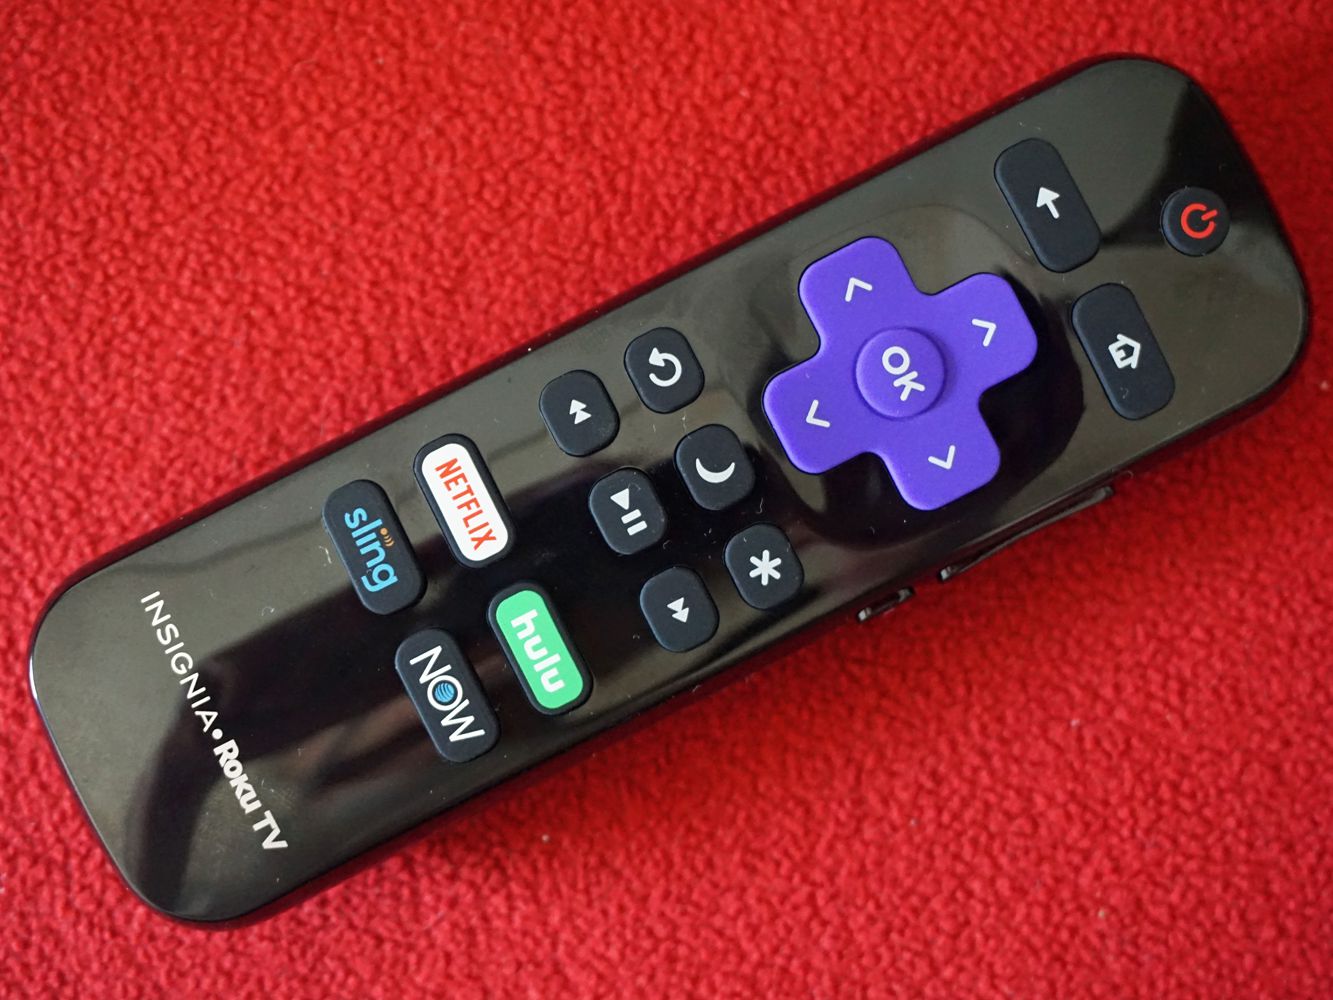 Roku Remote Volume Not Working: How To Troubleshoot?